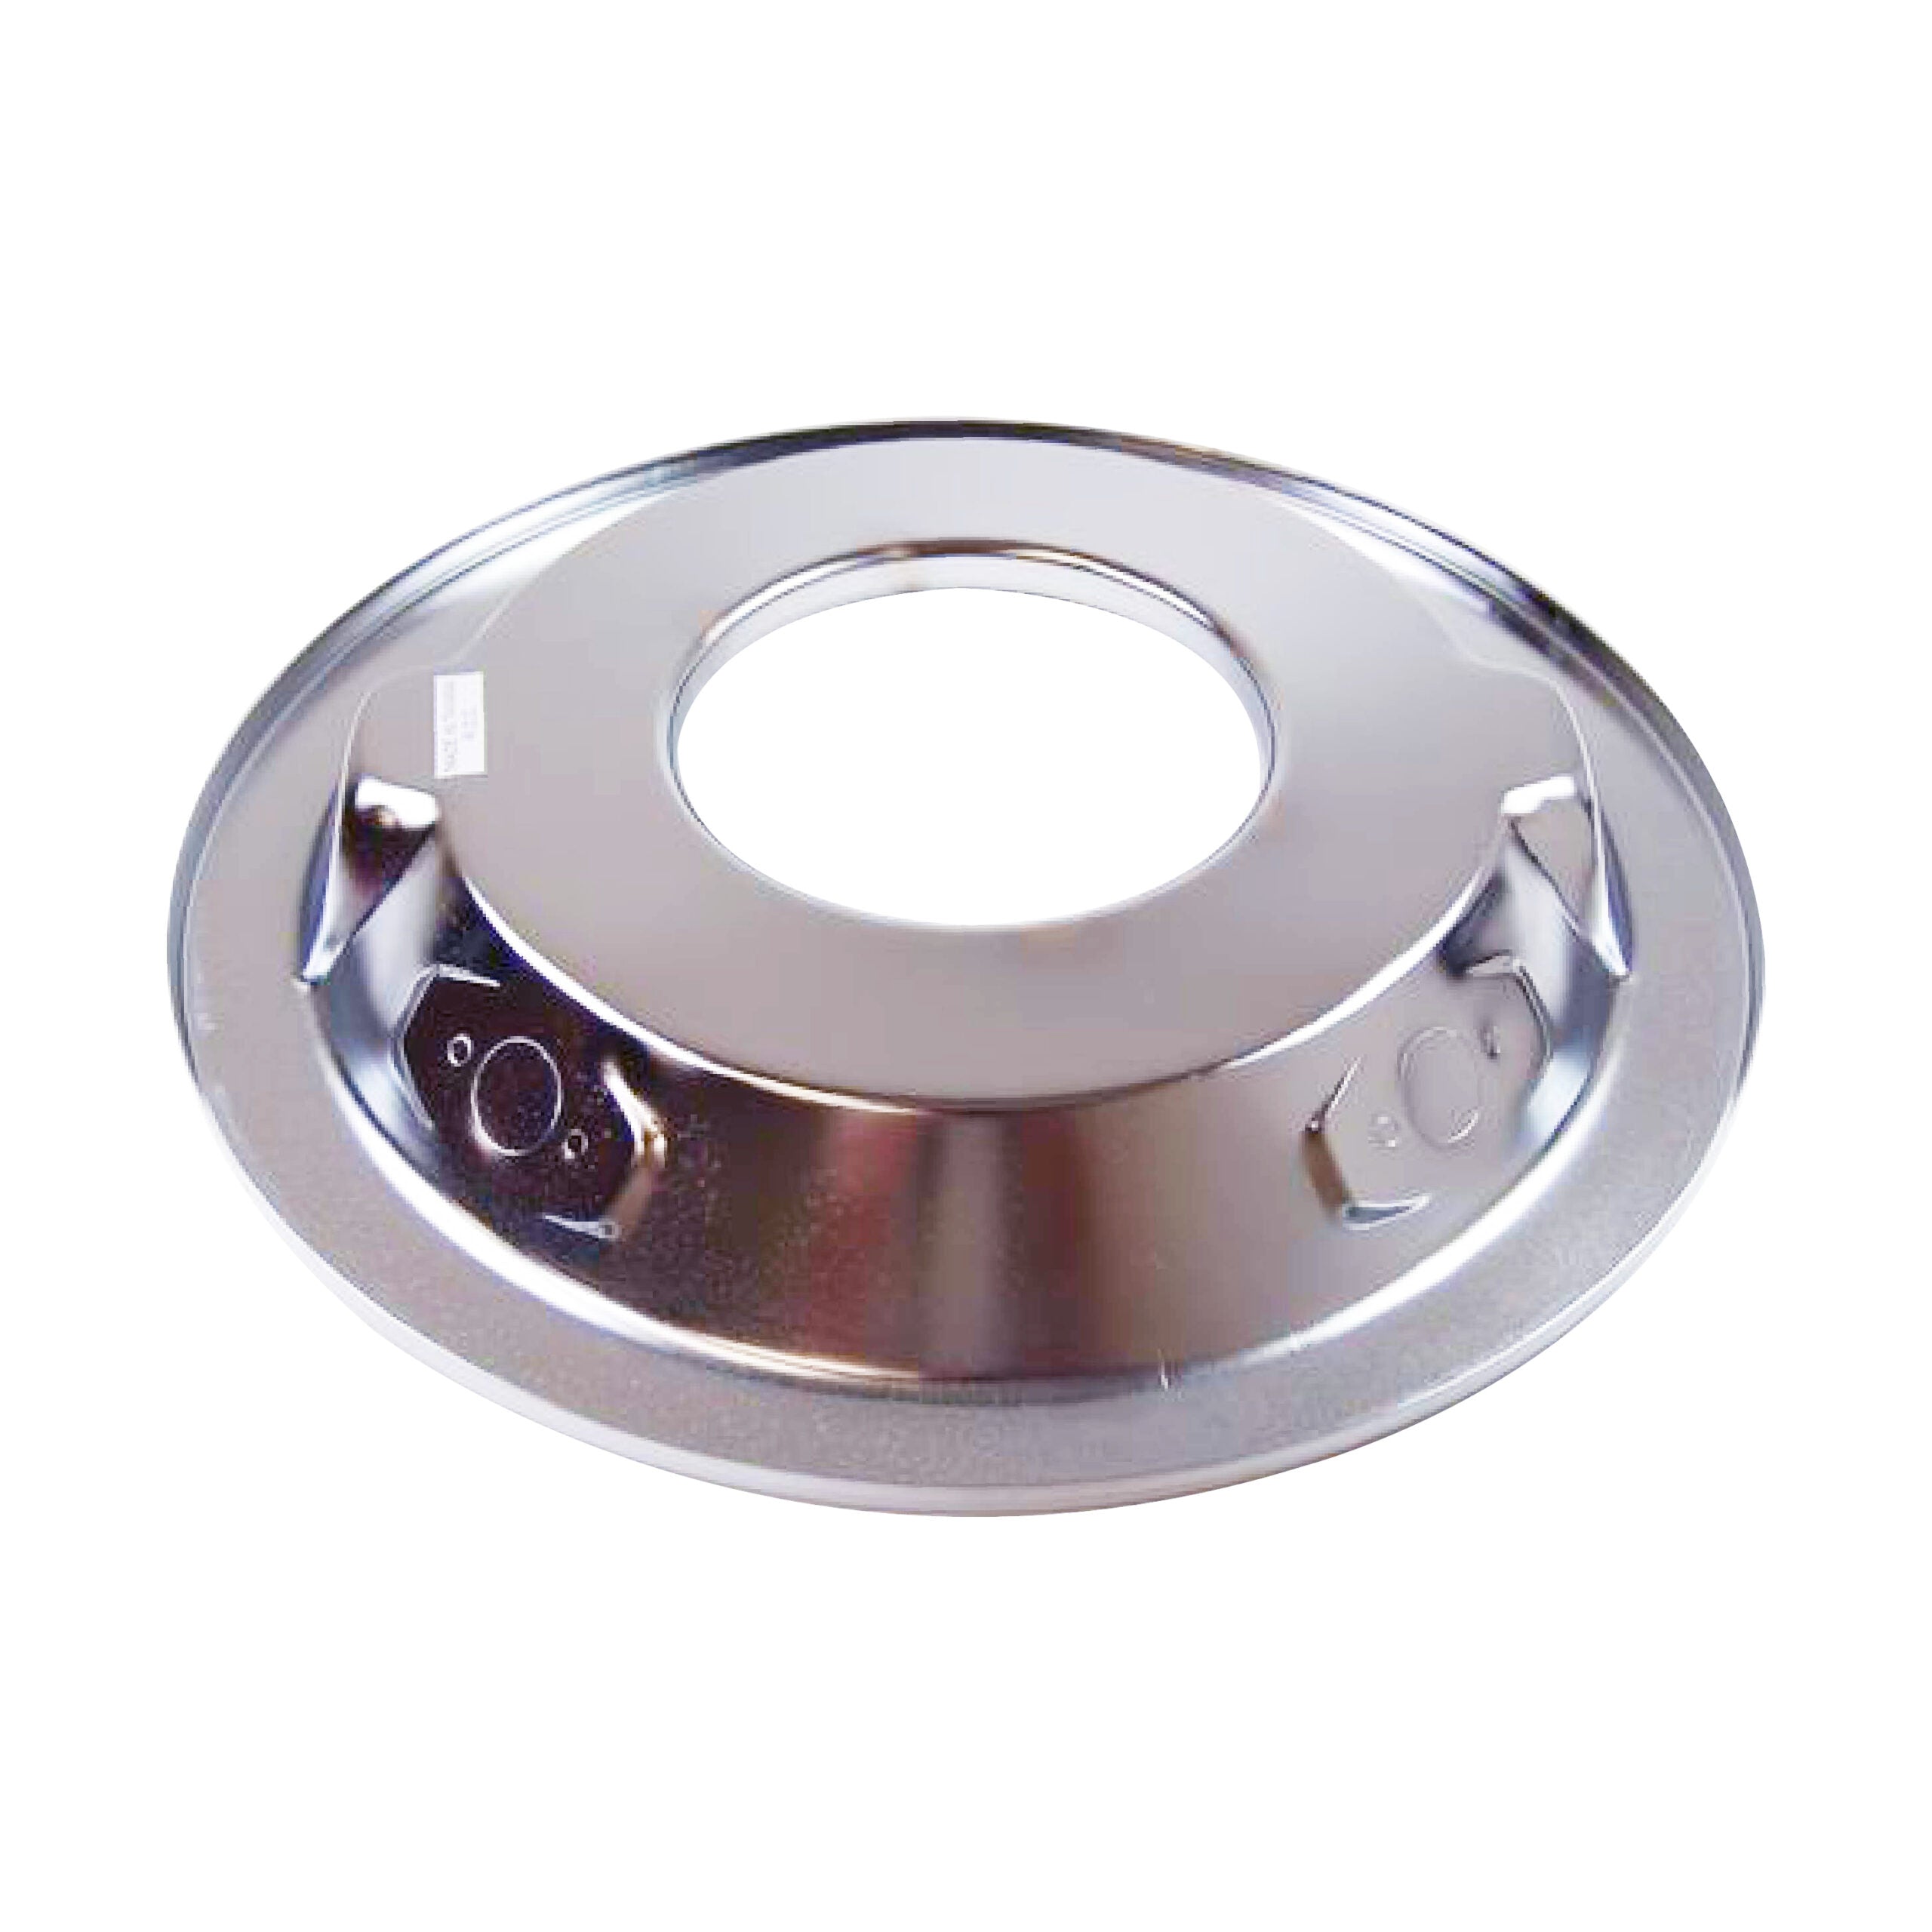 Racing Power Company R2195B 14 inch recessed air cleaner base - chrome